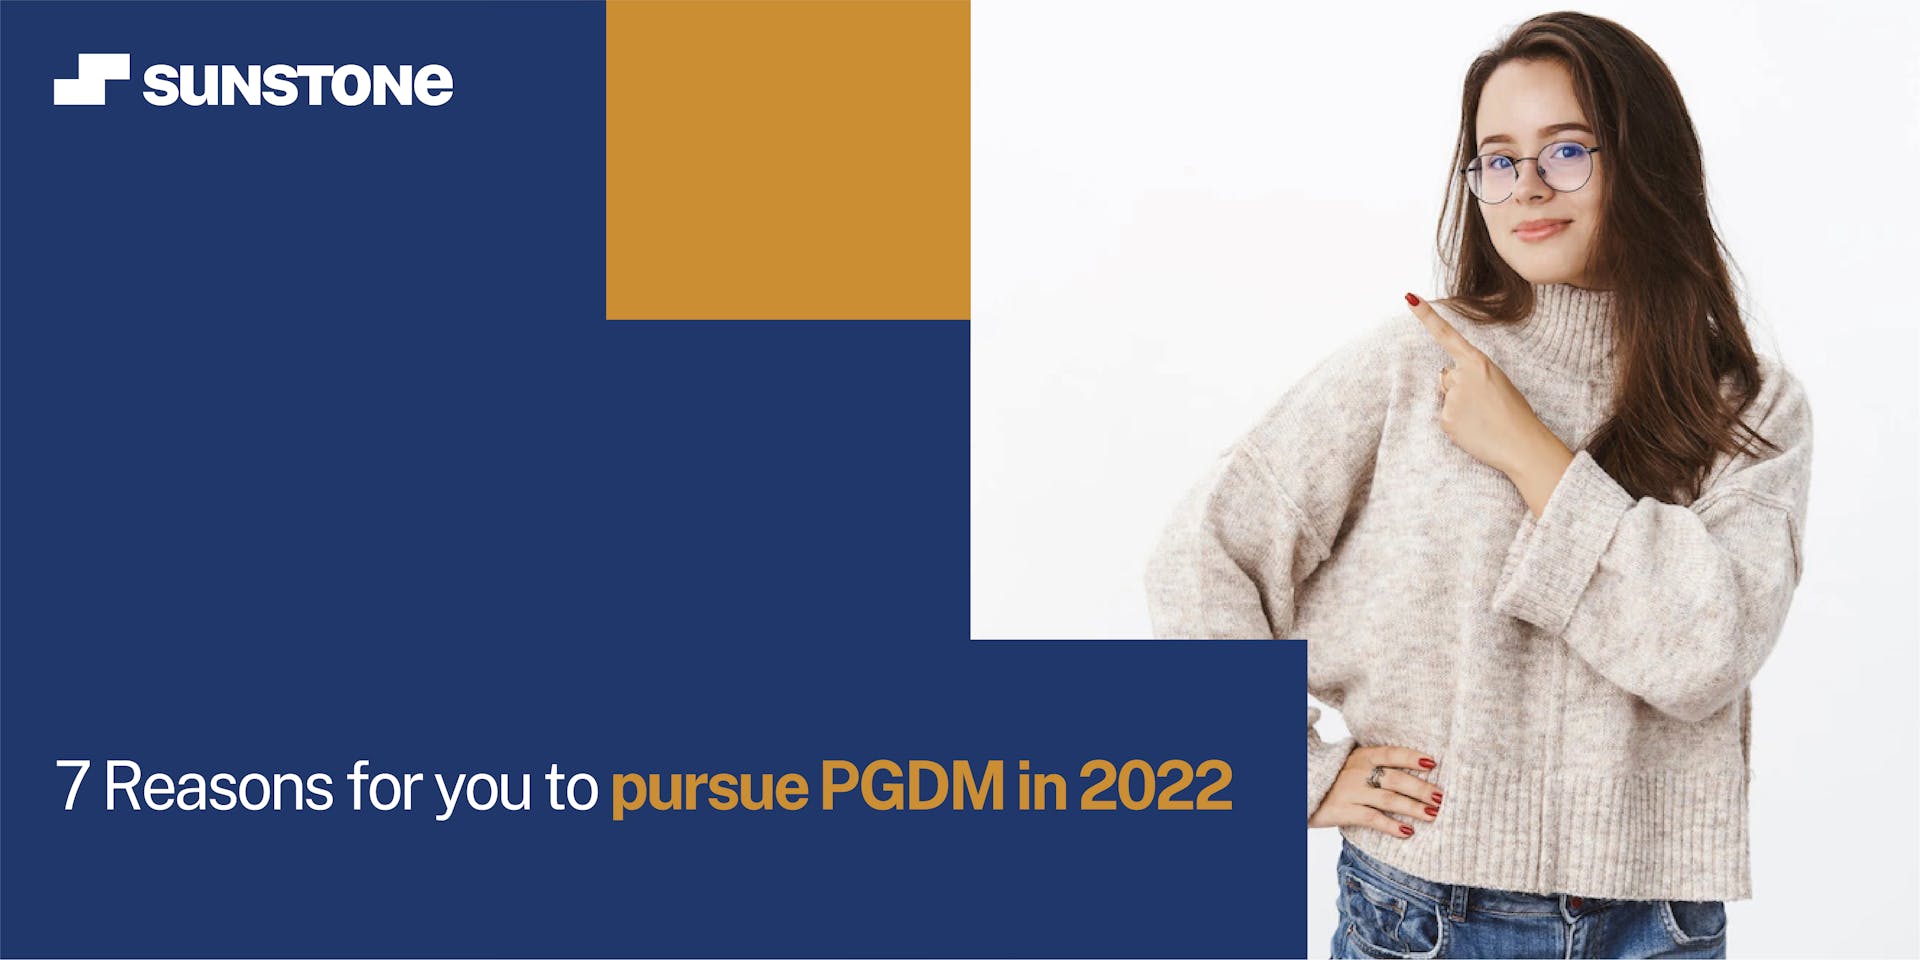 7 Reasons for Pursuing PGDM in 2022